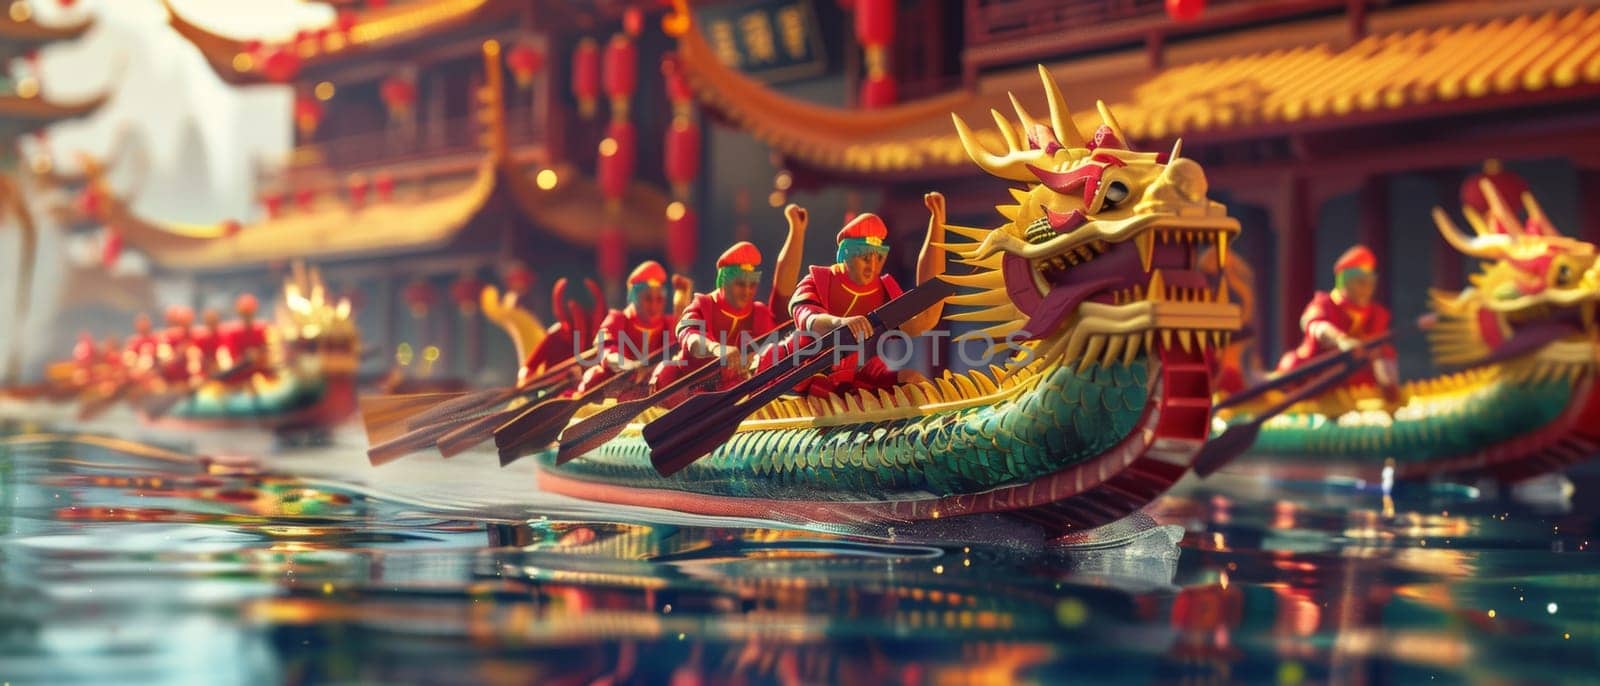 Artistic depiction of dragon boats gliding under a bridge with spectators gathering in traditional pagodas, amidst a tranquil, festive atmosphere. by sfinks